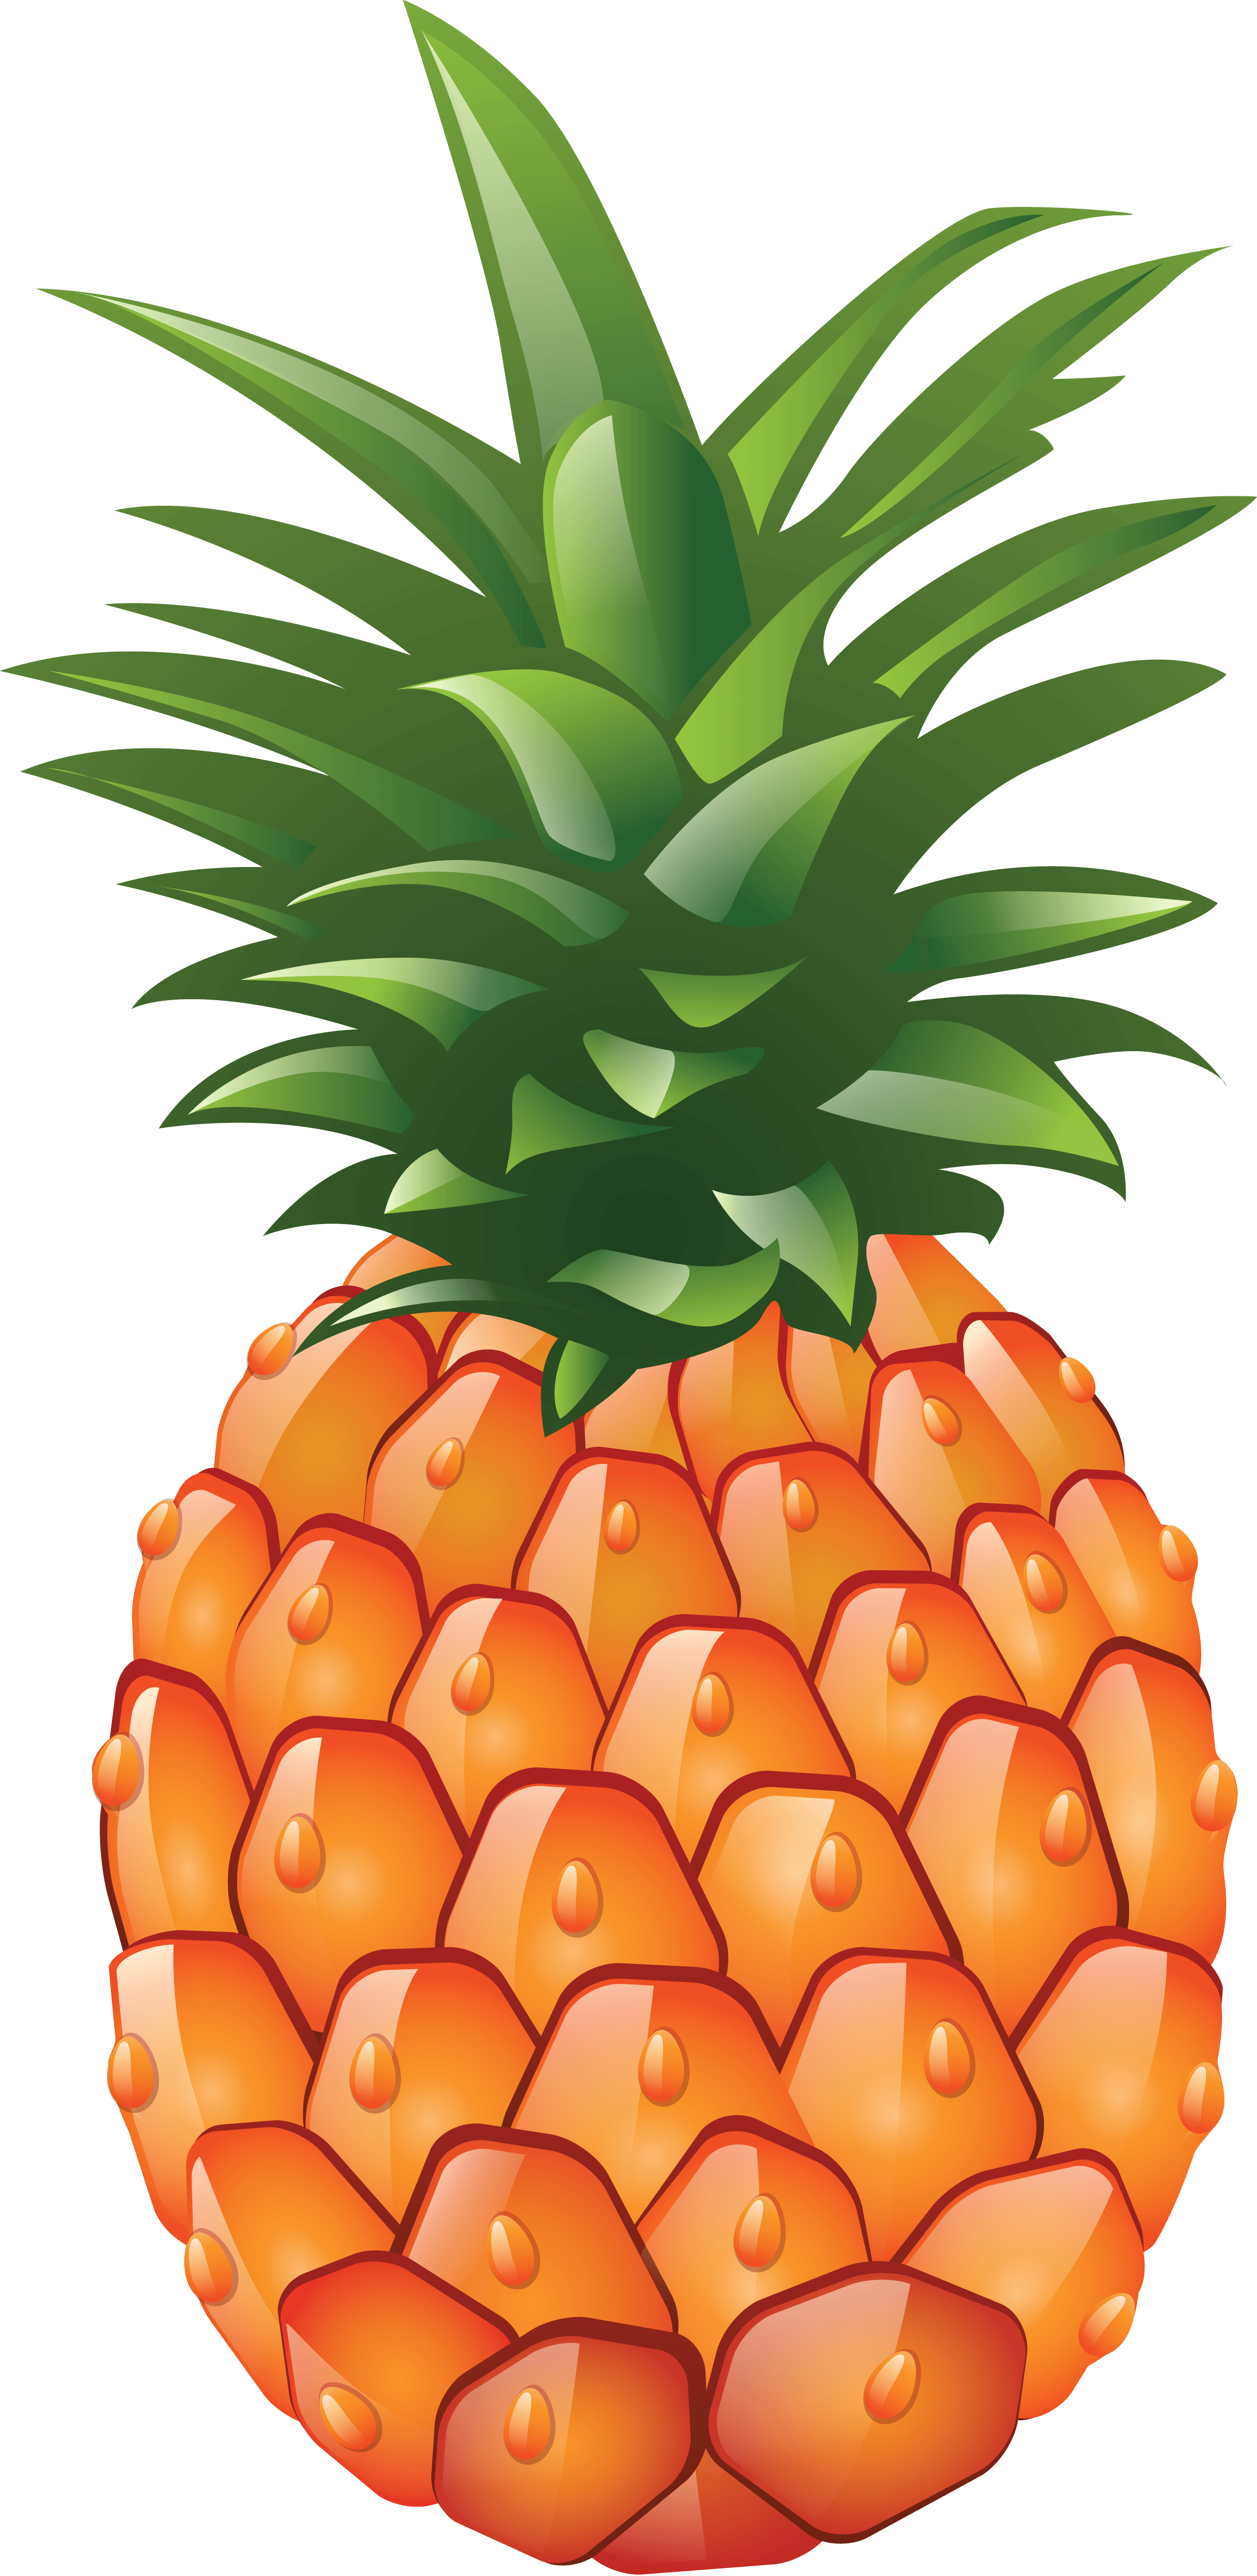 Pineapple png images.